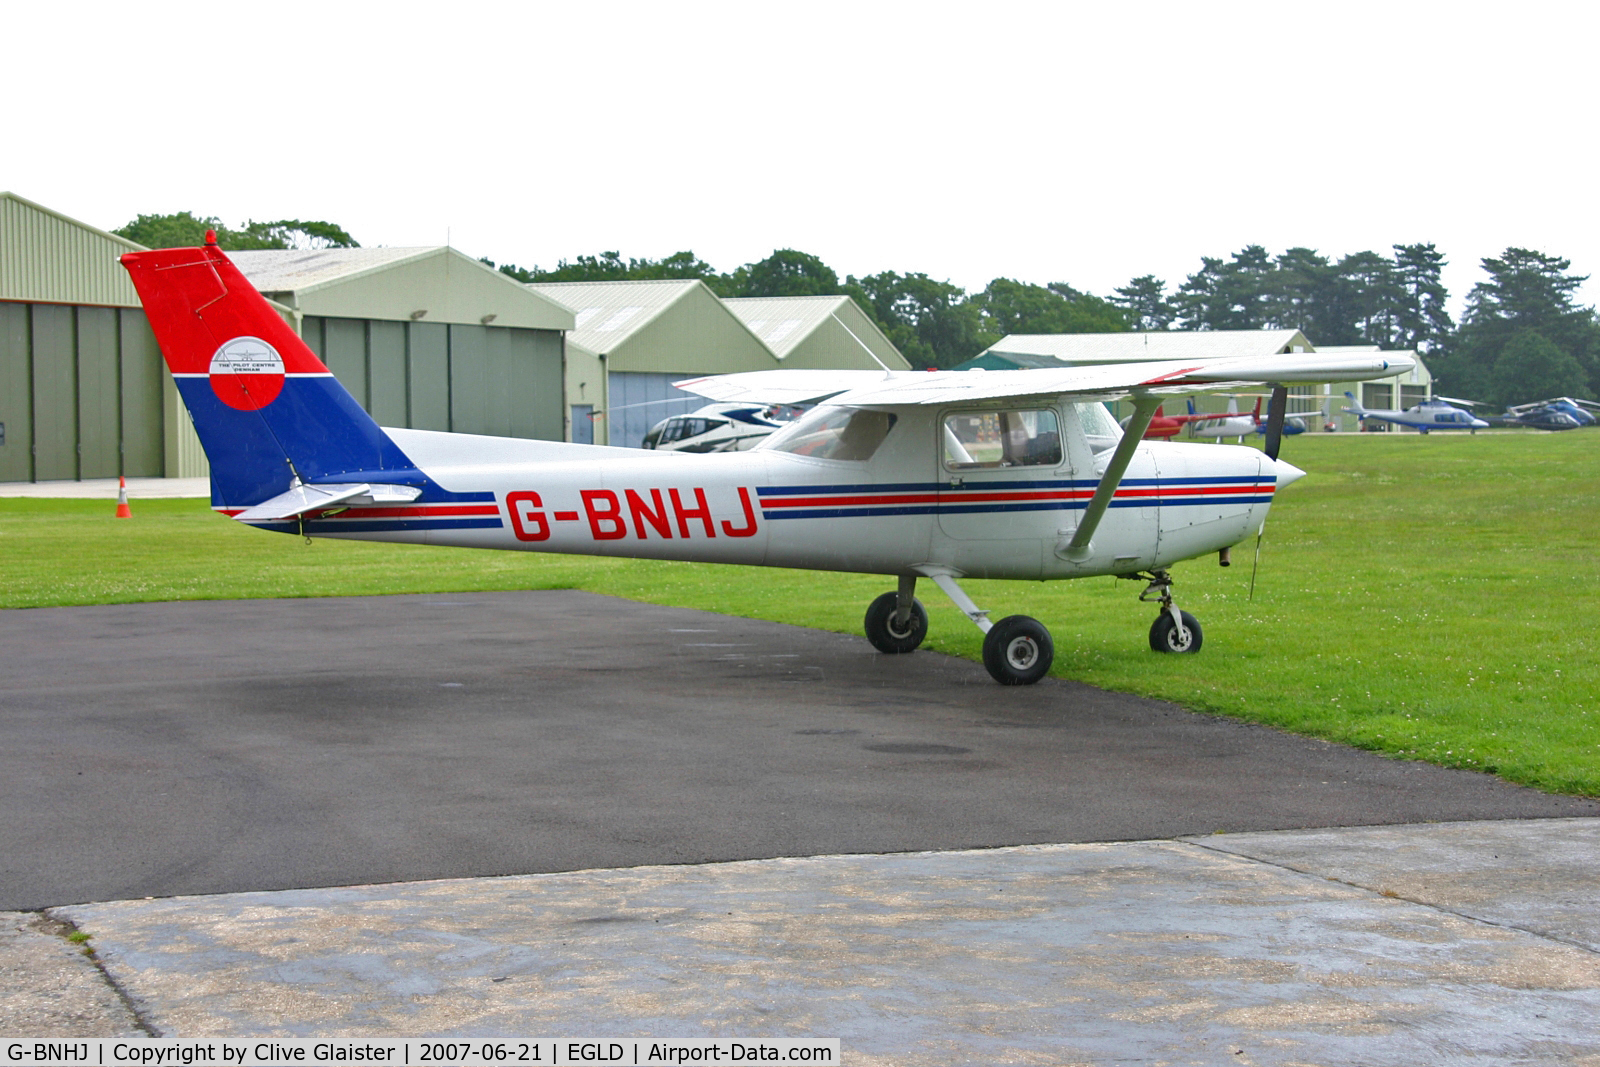 G-BNHJ, 1978 Cessna 152 C/N 152-81249, OWNED BY: THE PILOT CENTRE LTD